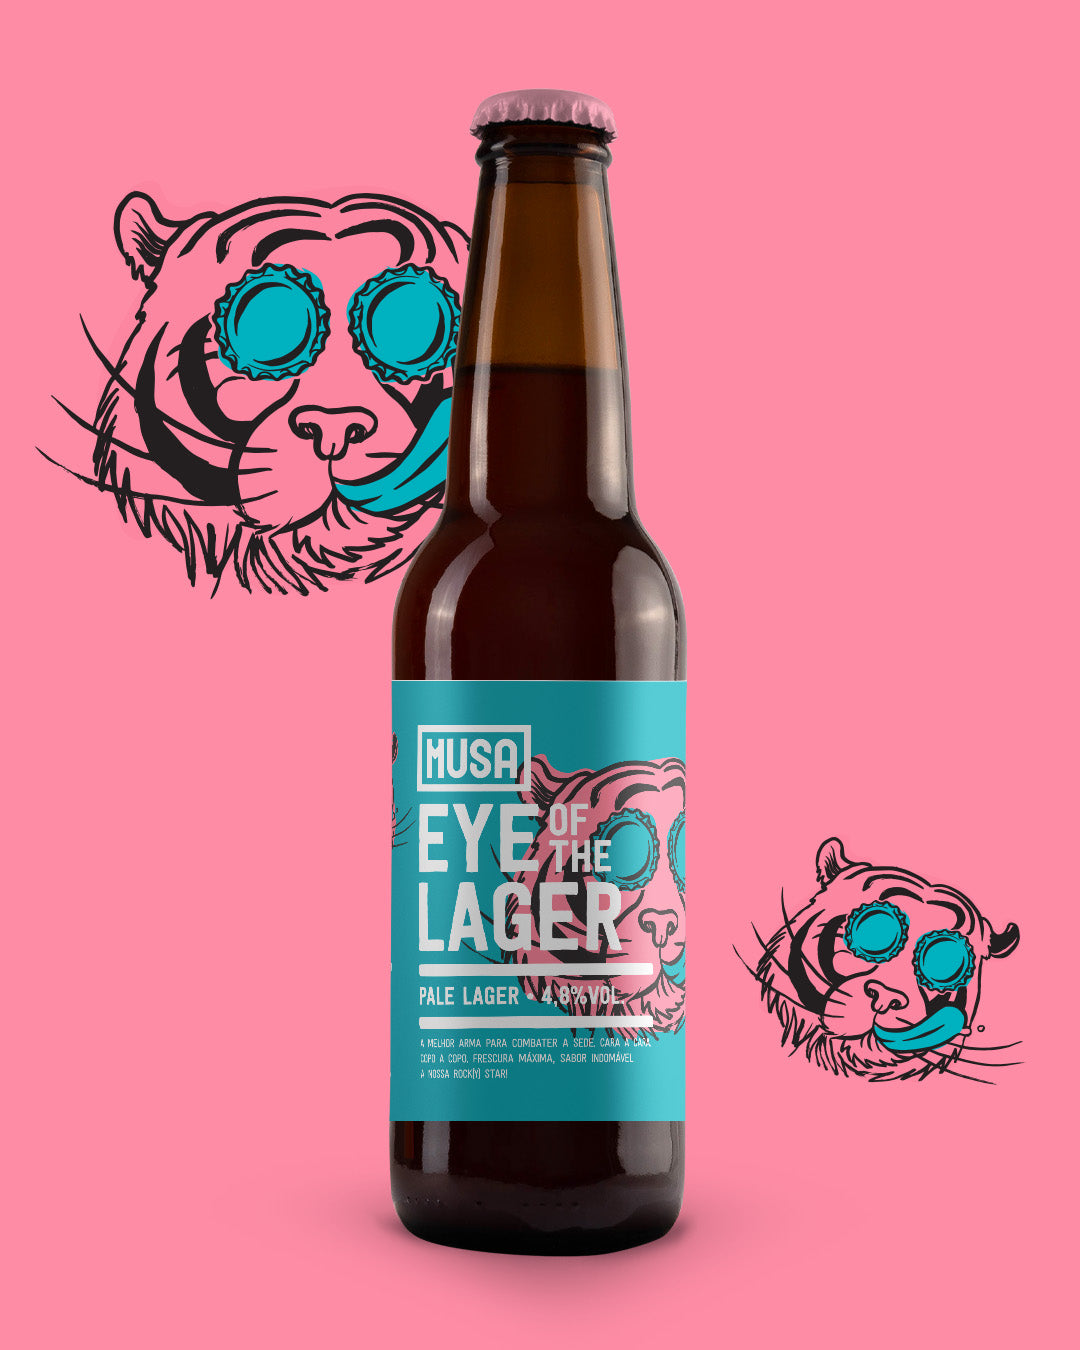 Eye of the Lager